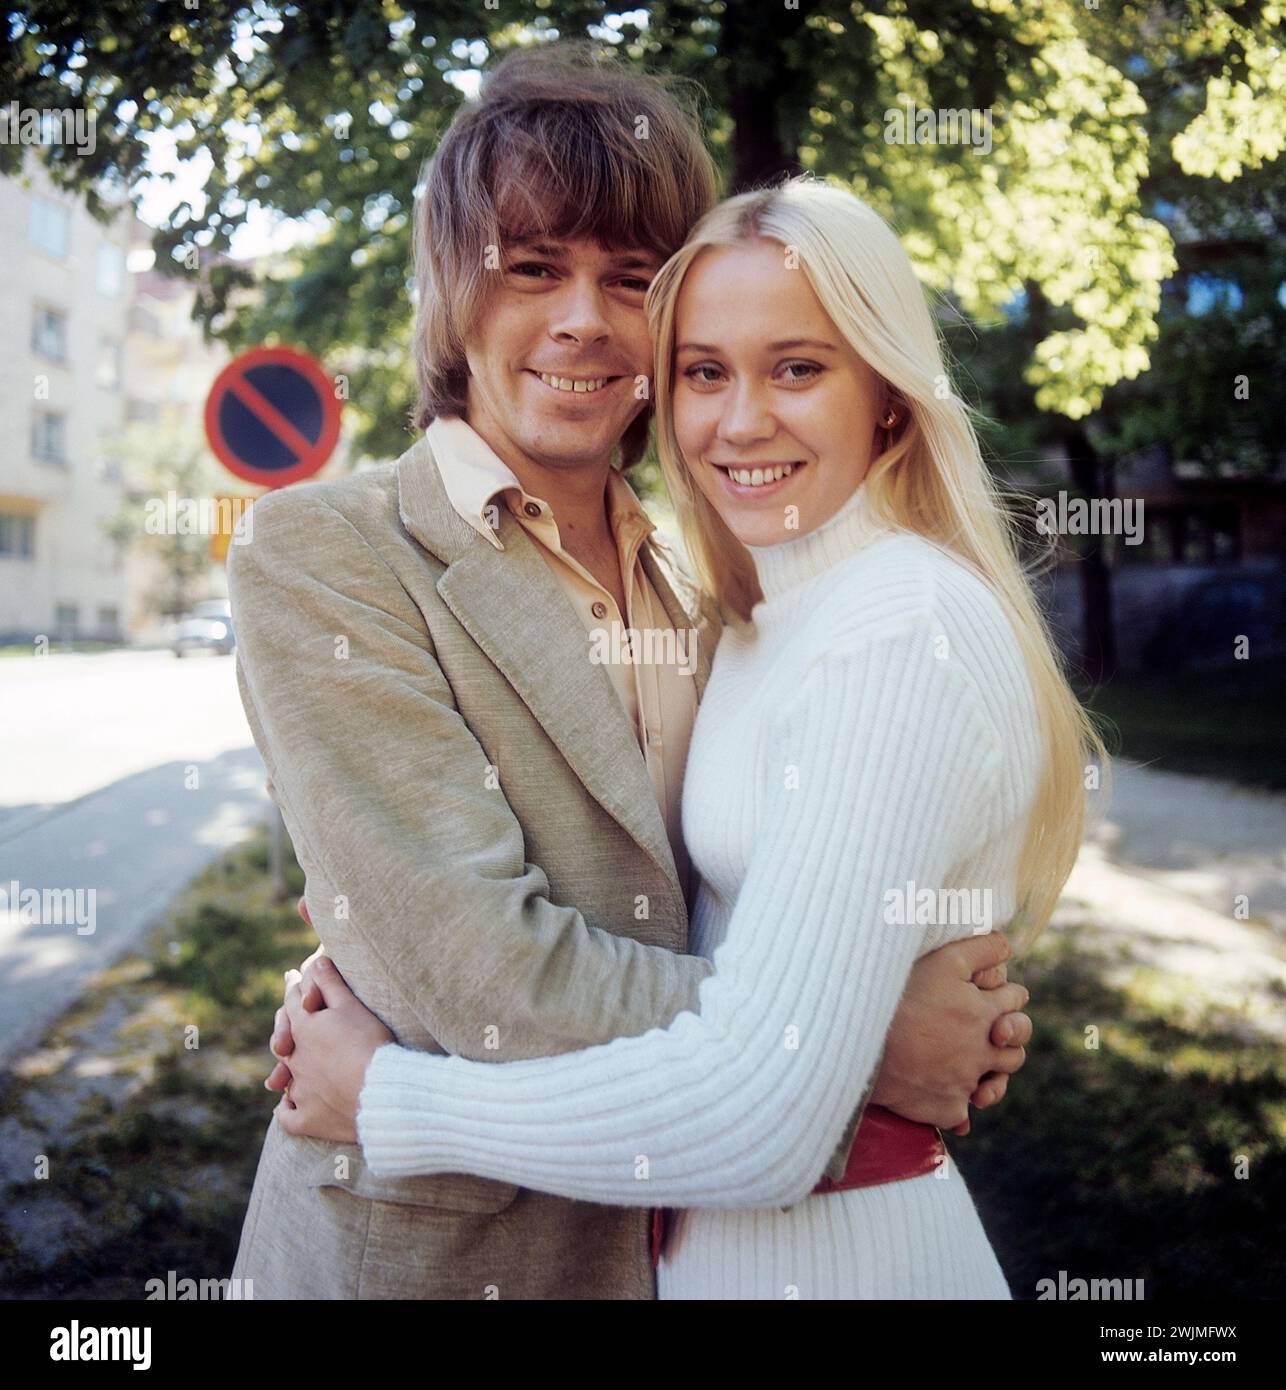 Agnetha Fältskog (b. 1950)Swedish pop singer, one of the four members of ABBA Here at home with Björn Ulvaeus (b. 1945) Swedish musician and songwriter July 6, 1971 Photo: Åke Cyrus / Sjöberg Archive / TT code 2900 Stock Photo